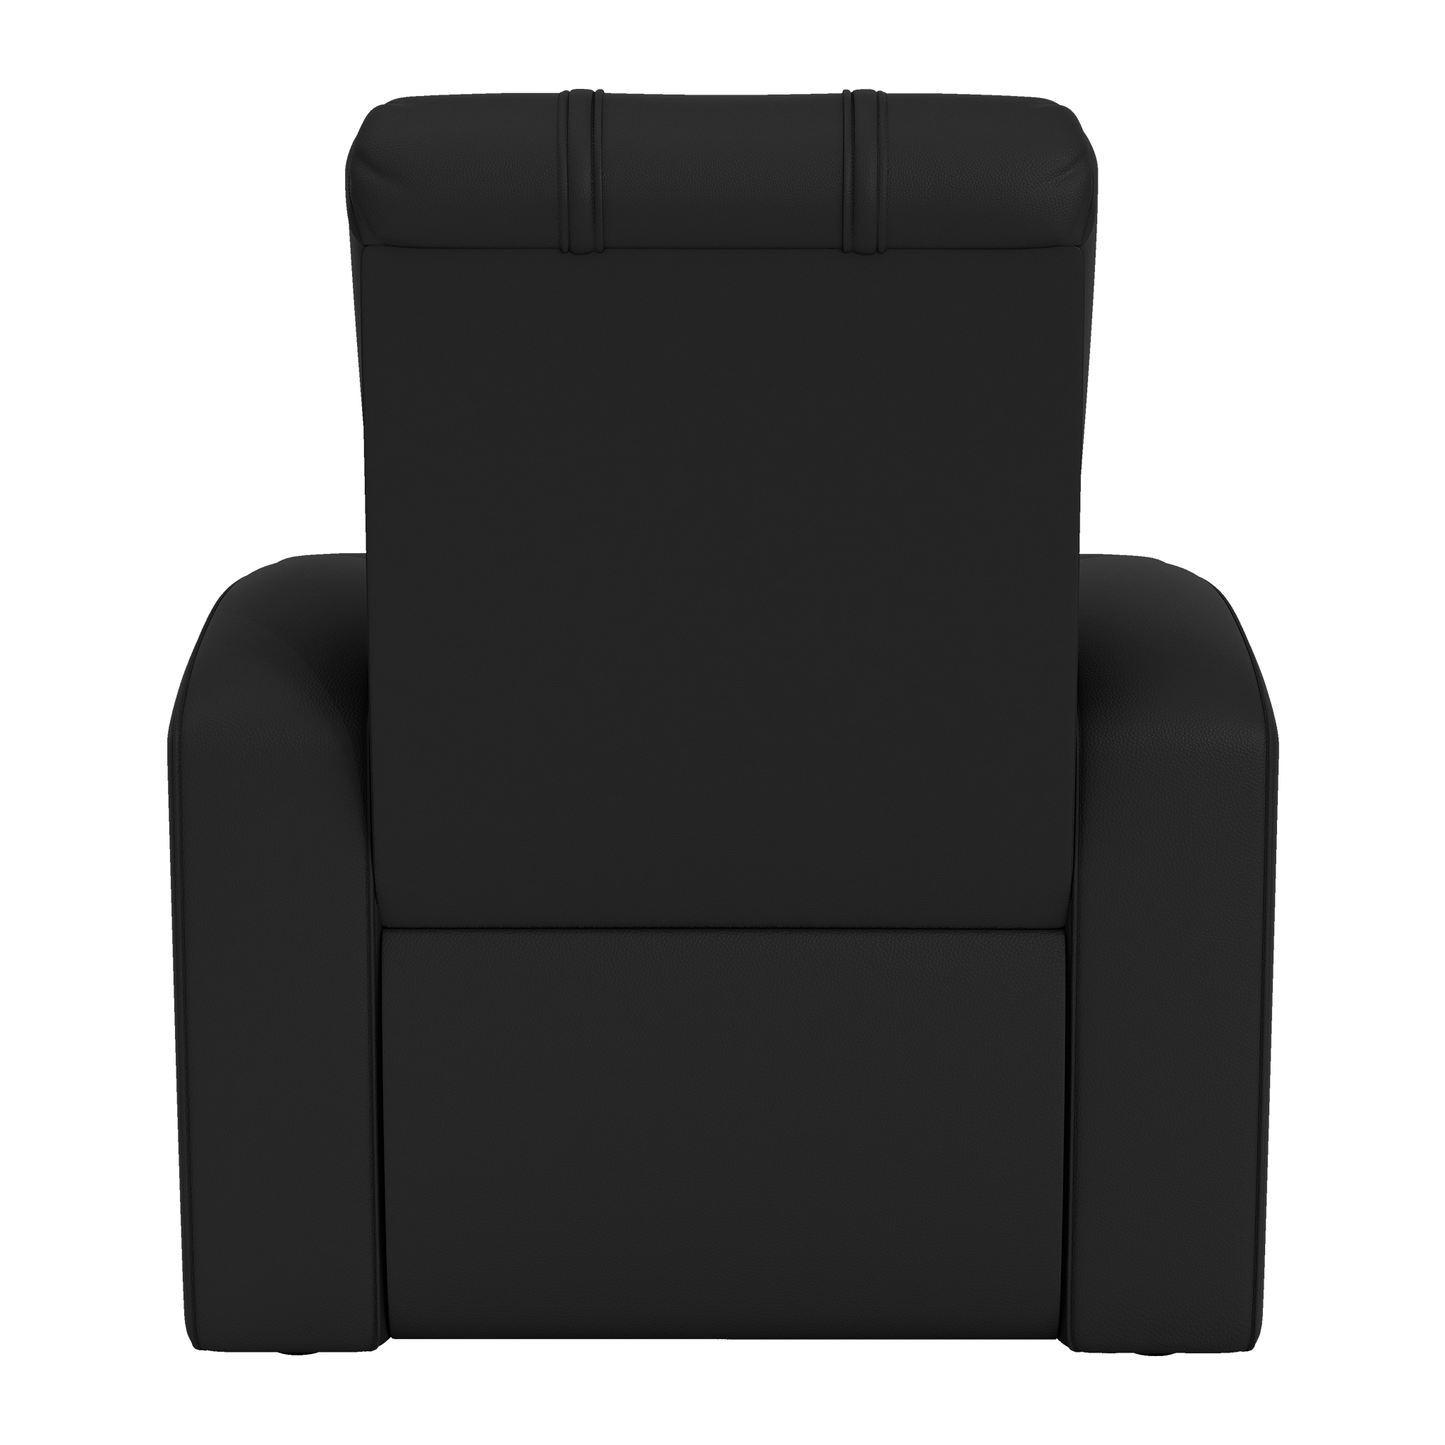 Relax Home Theater Recliner with Los Angeles Rams Classic Logo